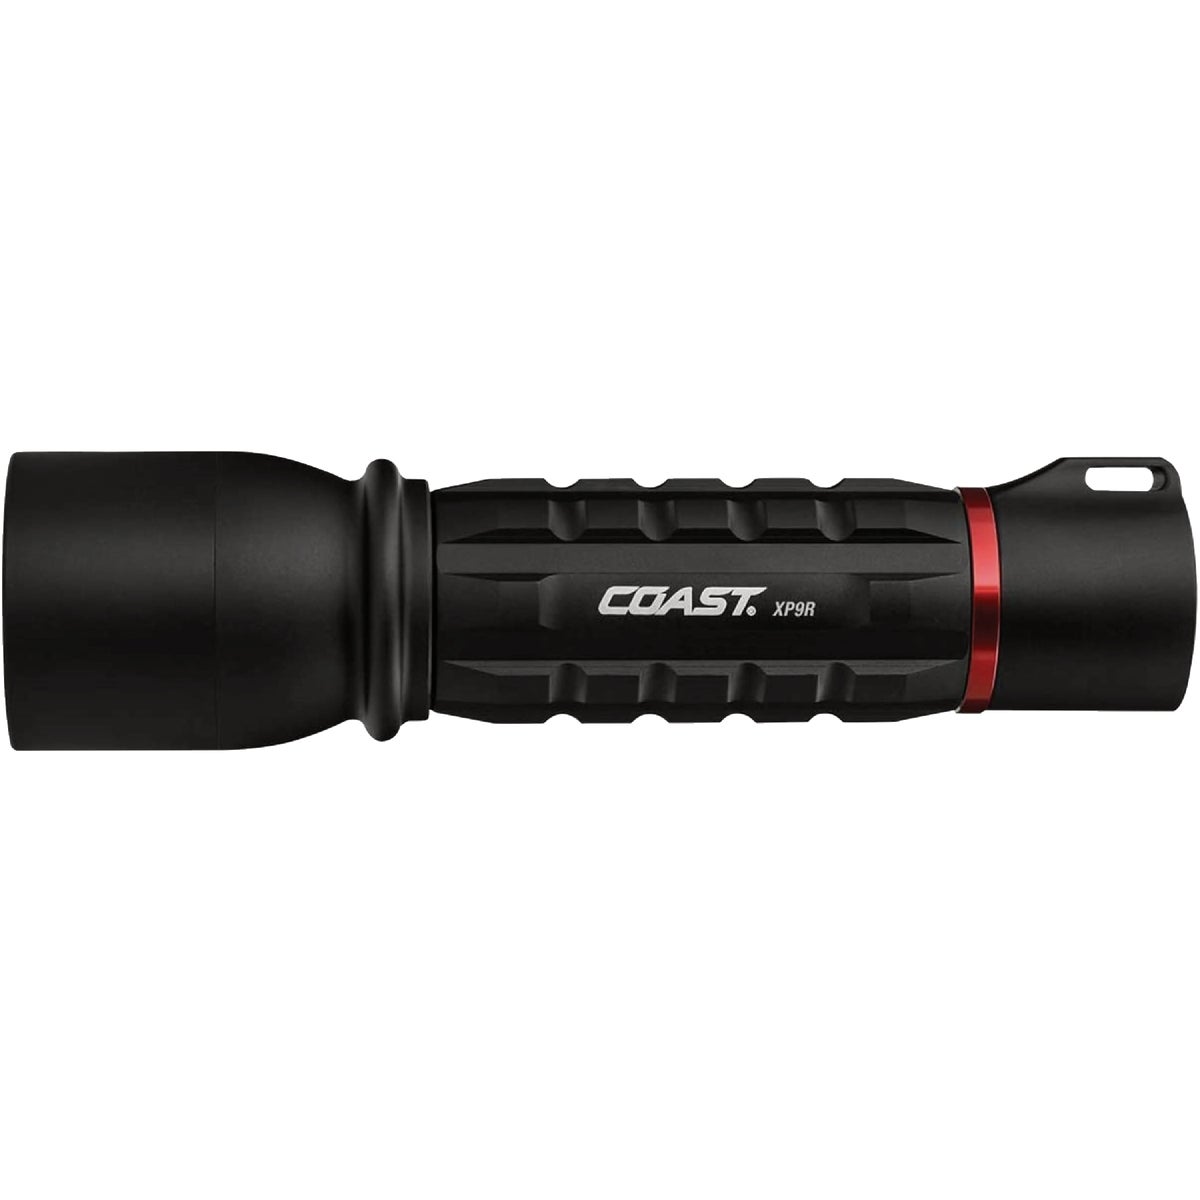 Coast XP9R 1000 Lm. LED ZX850 Zithion-X Rechargeable-Dual Power Flashlight